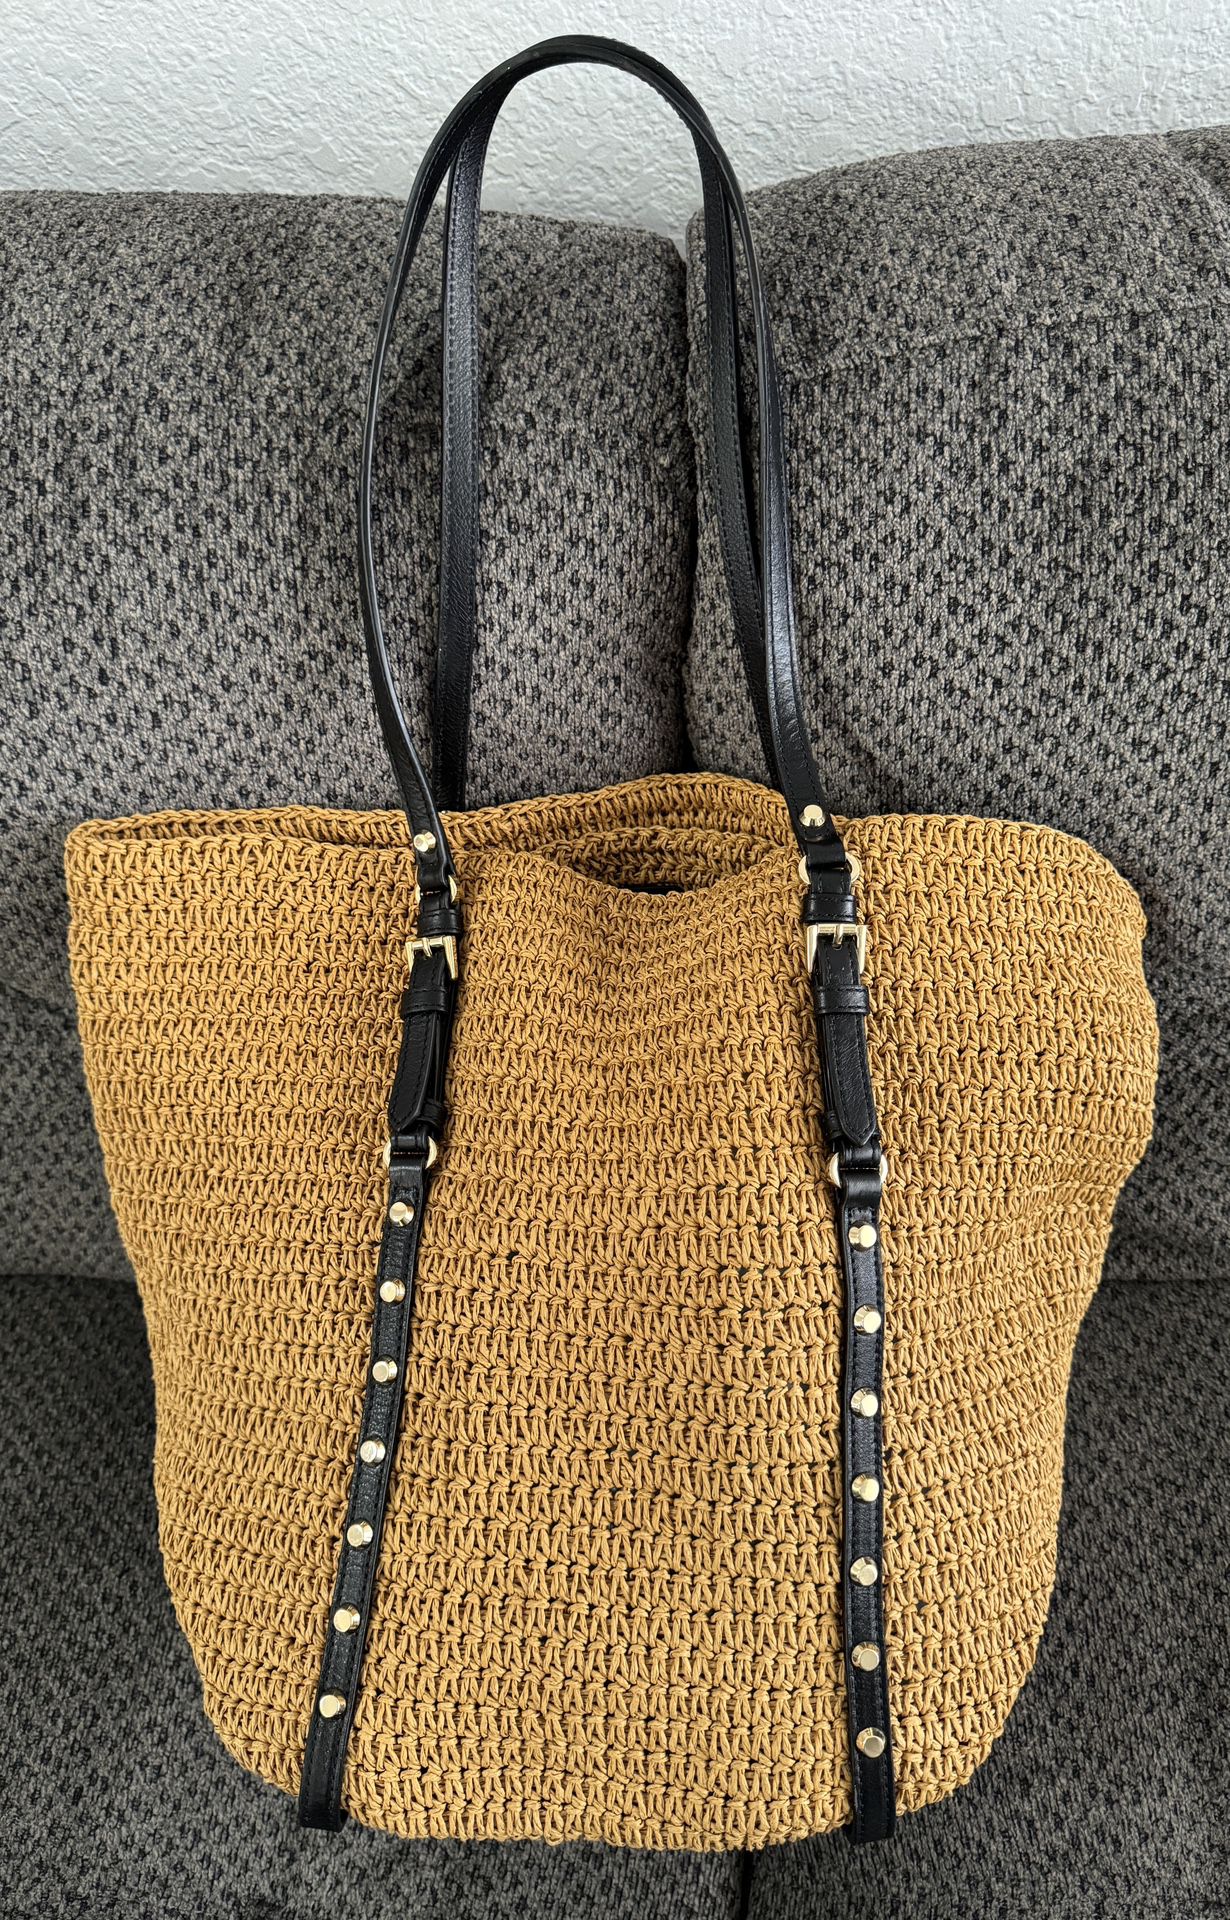 Michael Kors Large Studded Straw Shopper Tote Bag in Natural/Black Leather